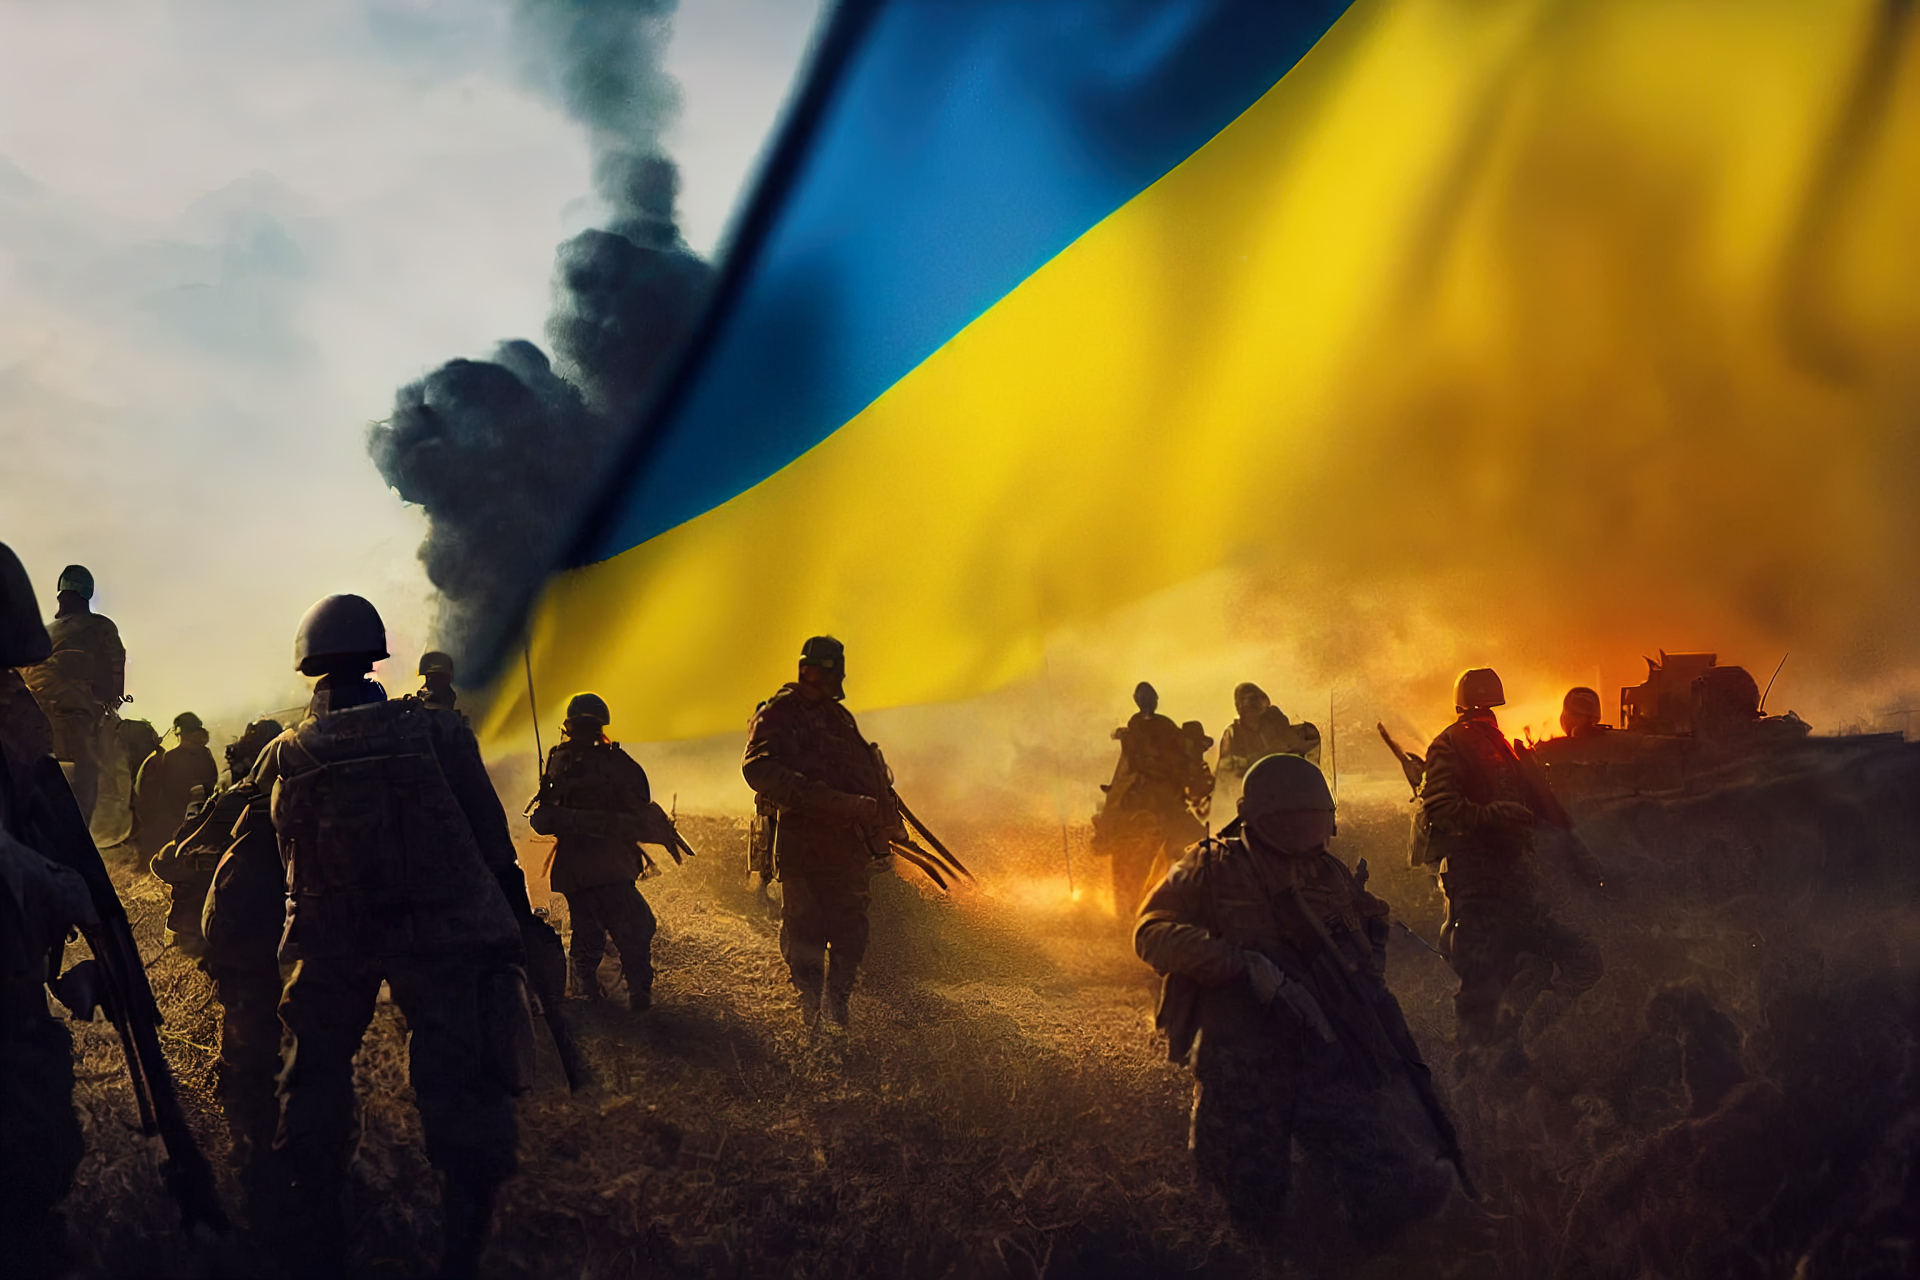 Ukraine: 60 percent of arms suppliers accept crypto payments
